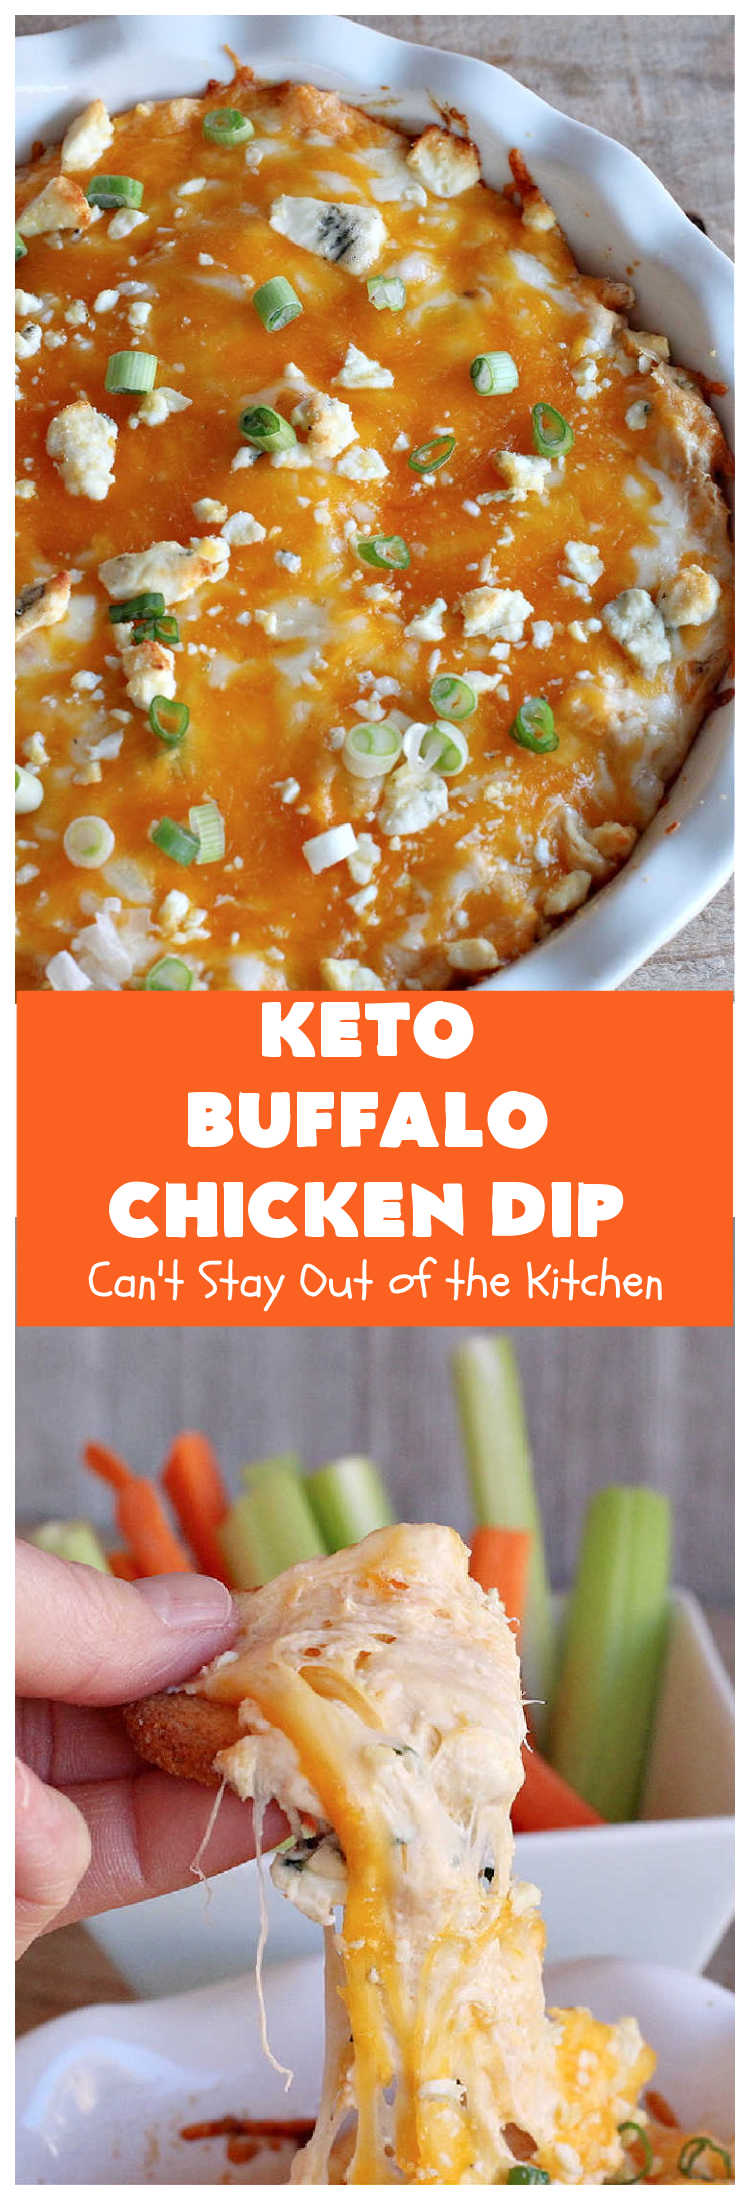 Keto Buffalo Chicken Dip | Can't Stay Out of the Kitchen